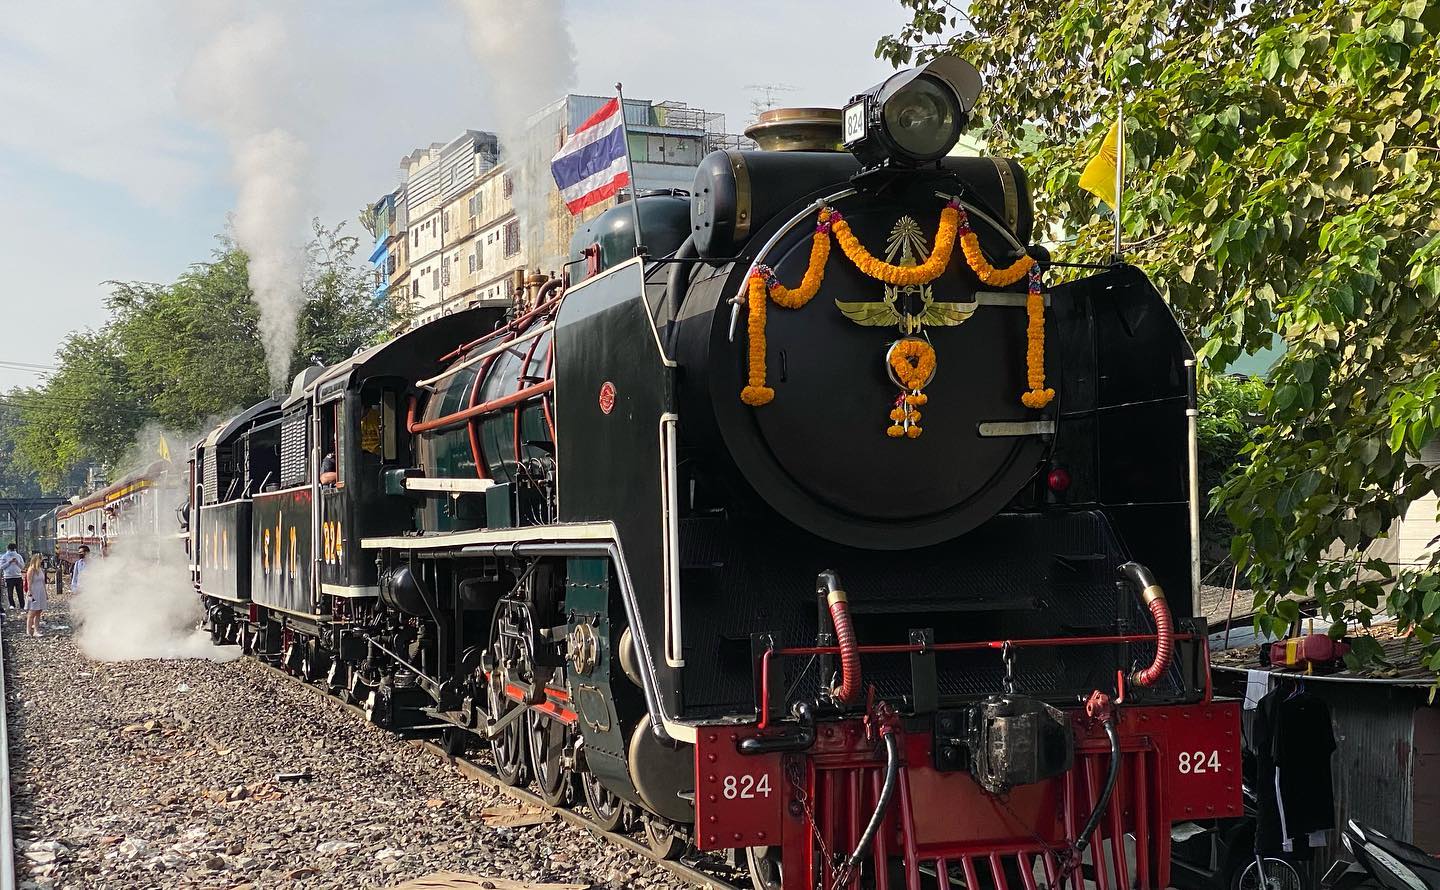 The steam locomotive leaving Bangkok today for the last time from the 105 year old Hua Lamphong station. 

#Thai #ThaiTravel #Thailand #ThailandTravel #ThailandInsider #AmazingThailand #Thailand_IG #igThailand #travel #travelgram #TravelPhotography #travelblogger #GoLocal #ReviewThailand #Opentothenewshades #Bangkok #steamtrain #steamtrains #steamlocomotive #train #รถไฟไทย #thaitrain